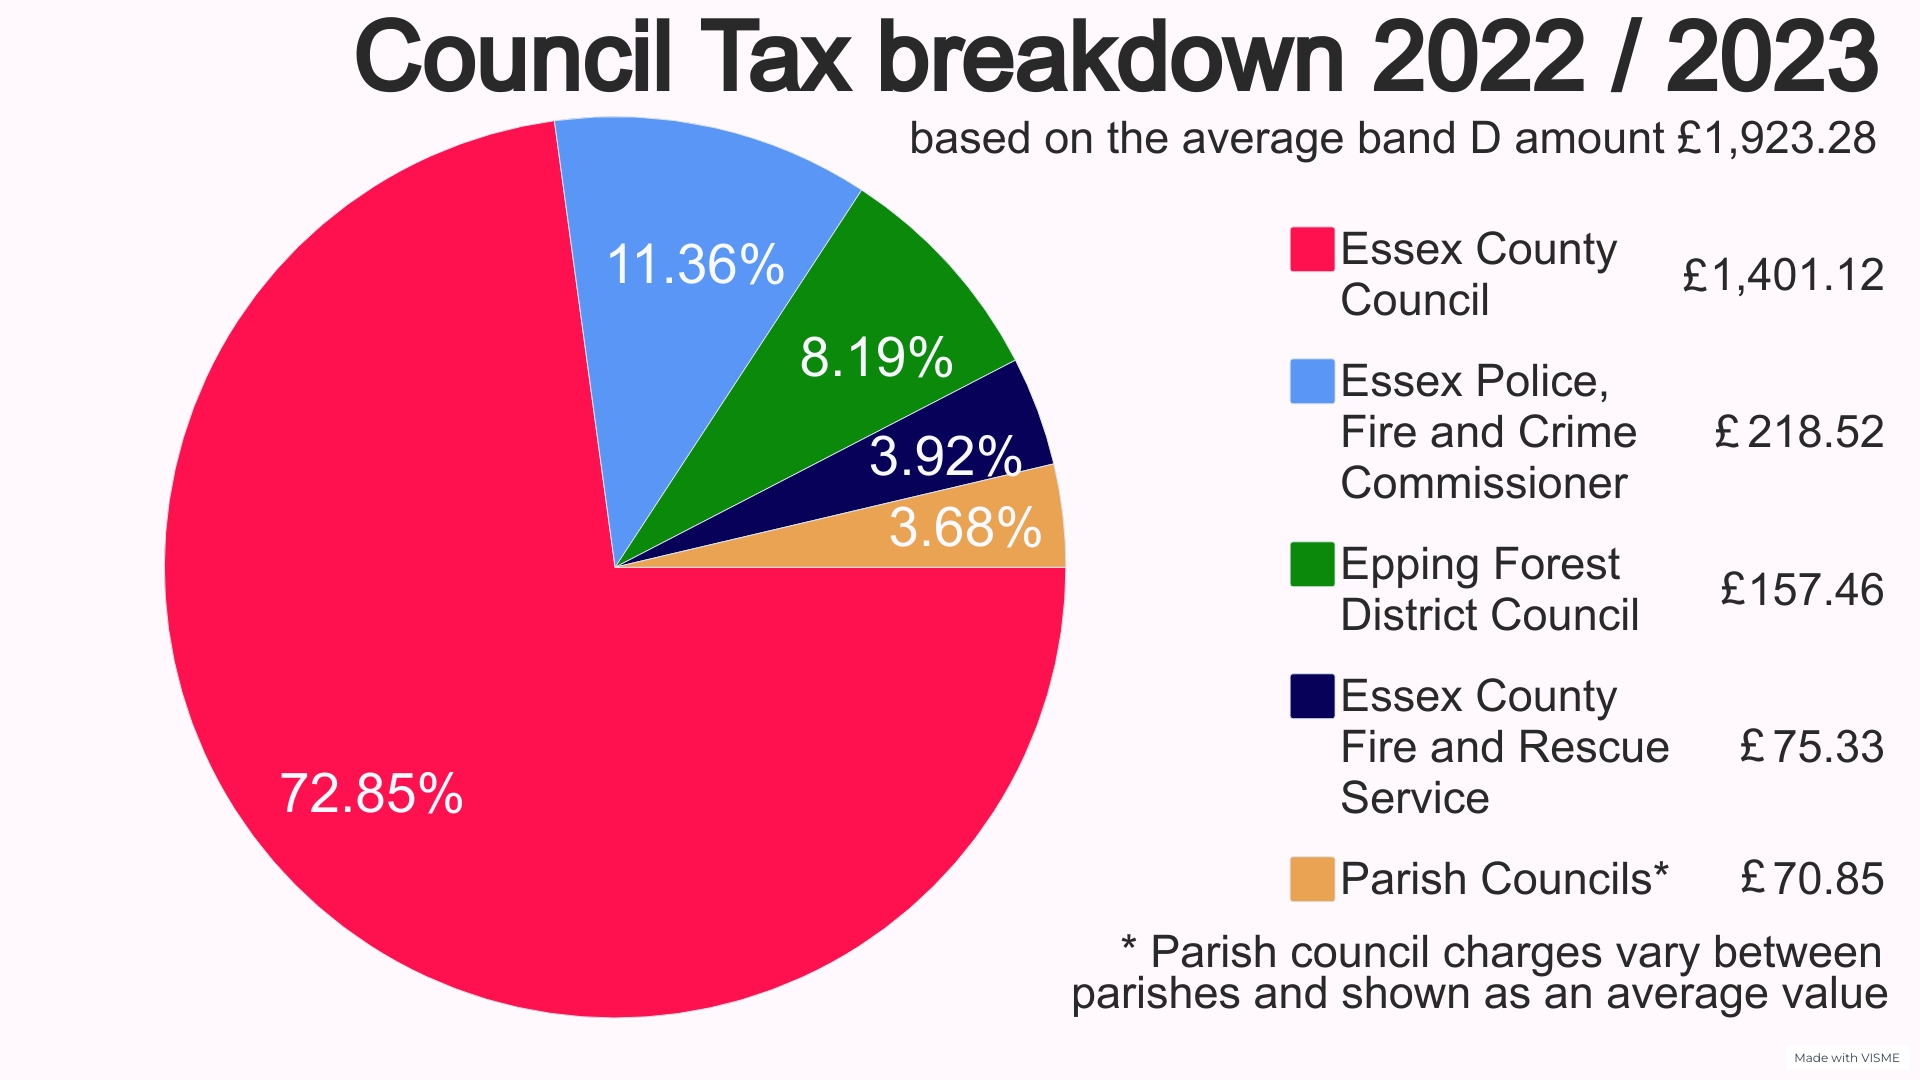 babergh-residents-could-see-increases-of-3-for-council-tax